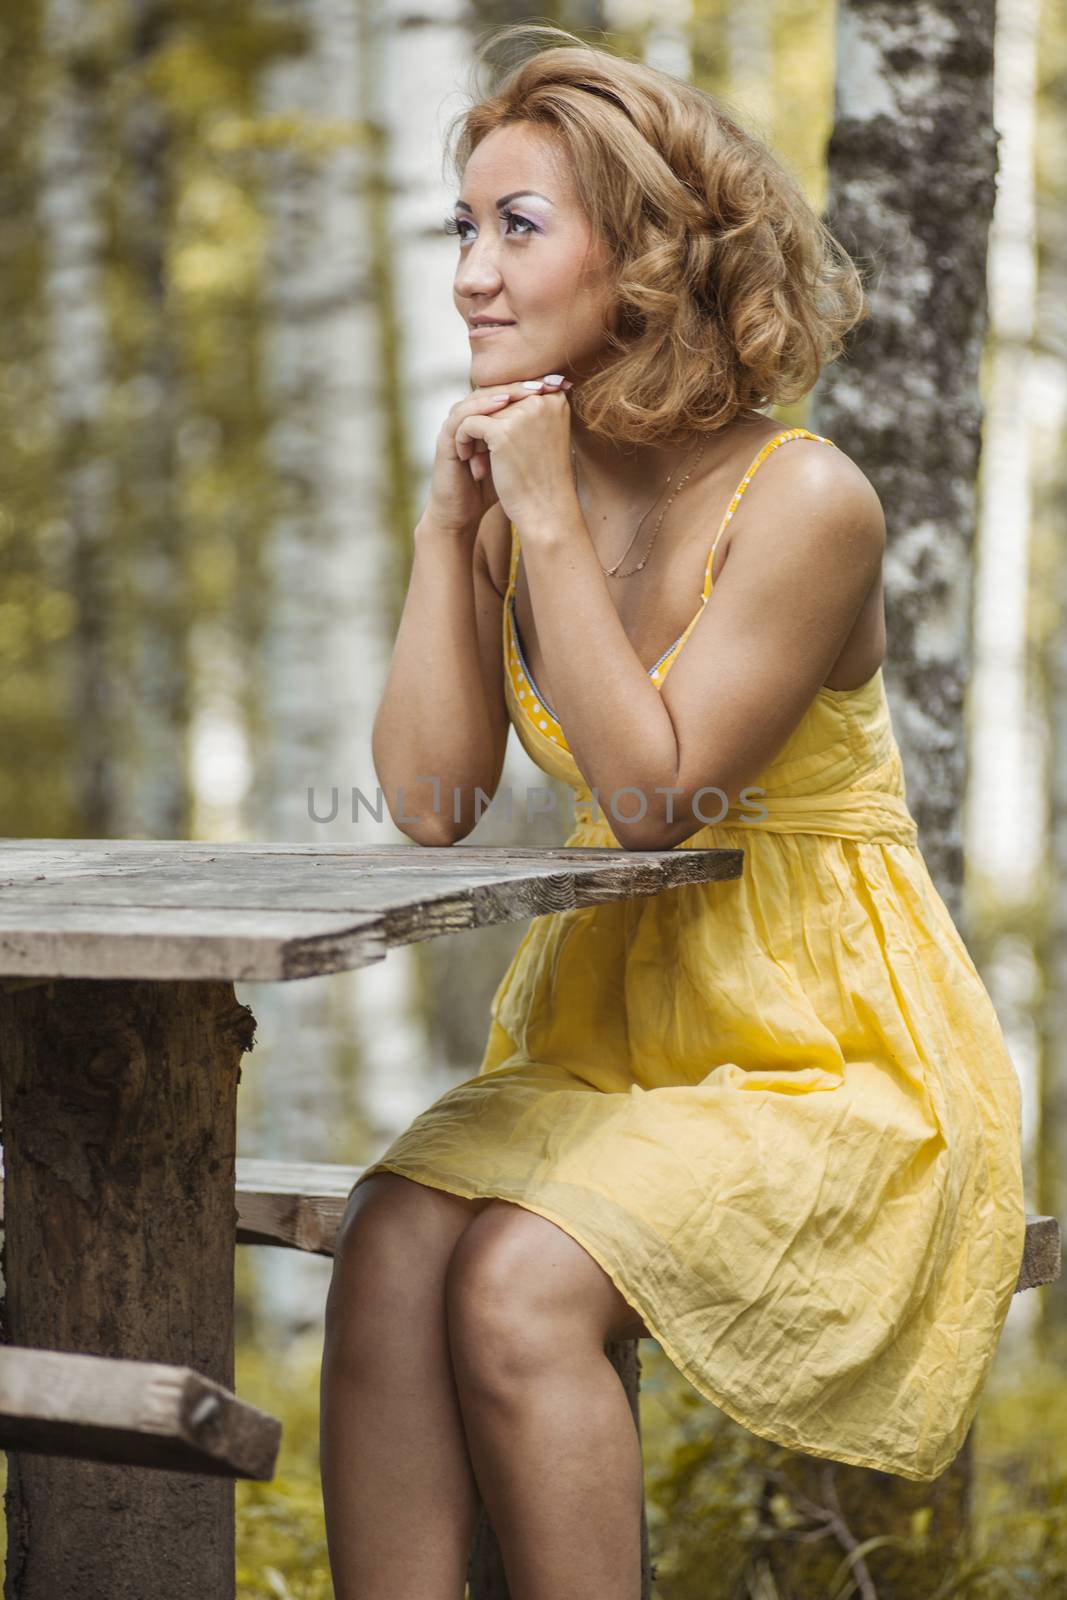 A girl in a yellow dress sitting in the woods behind a wooden table